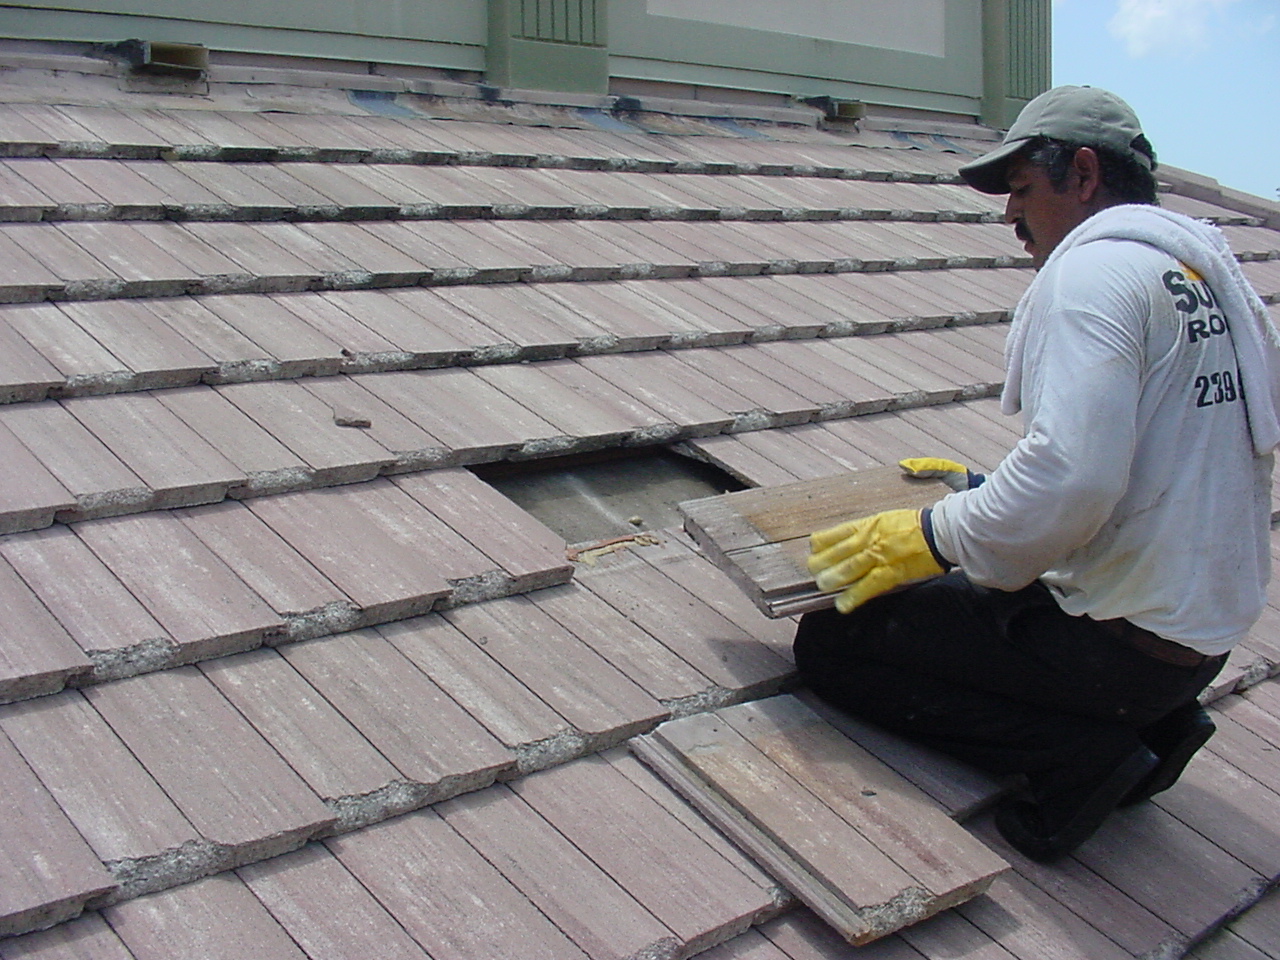 Broken Roof Tile Repair And Replace, How To Replace A Clay Roof Tile